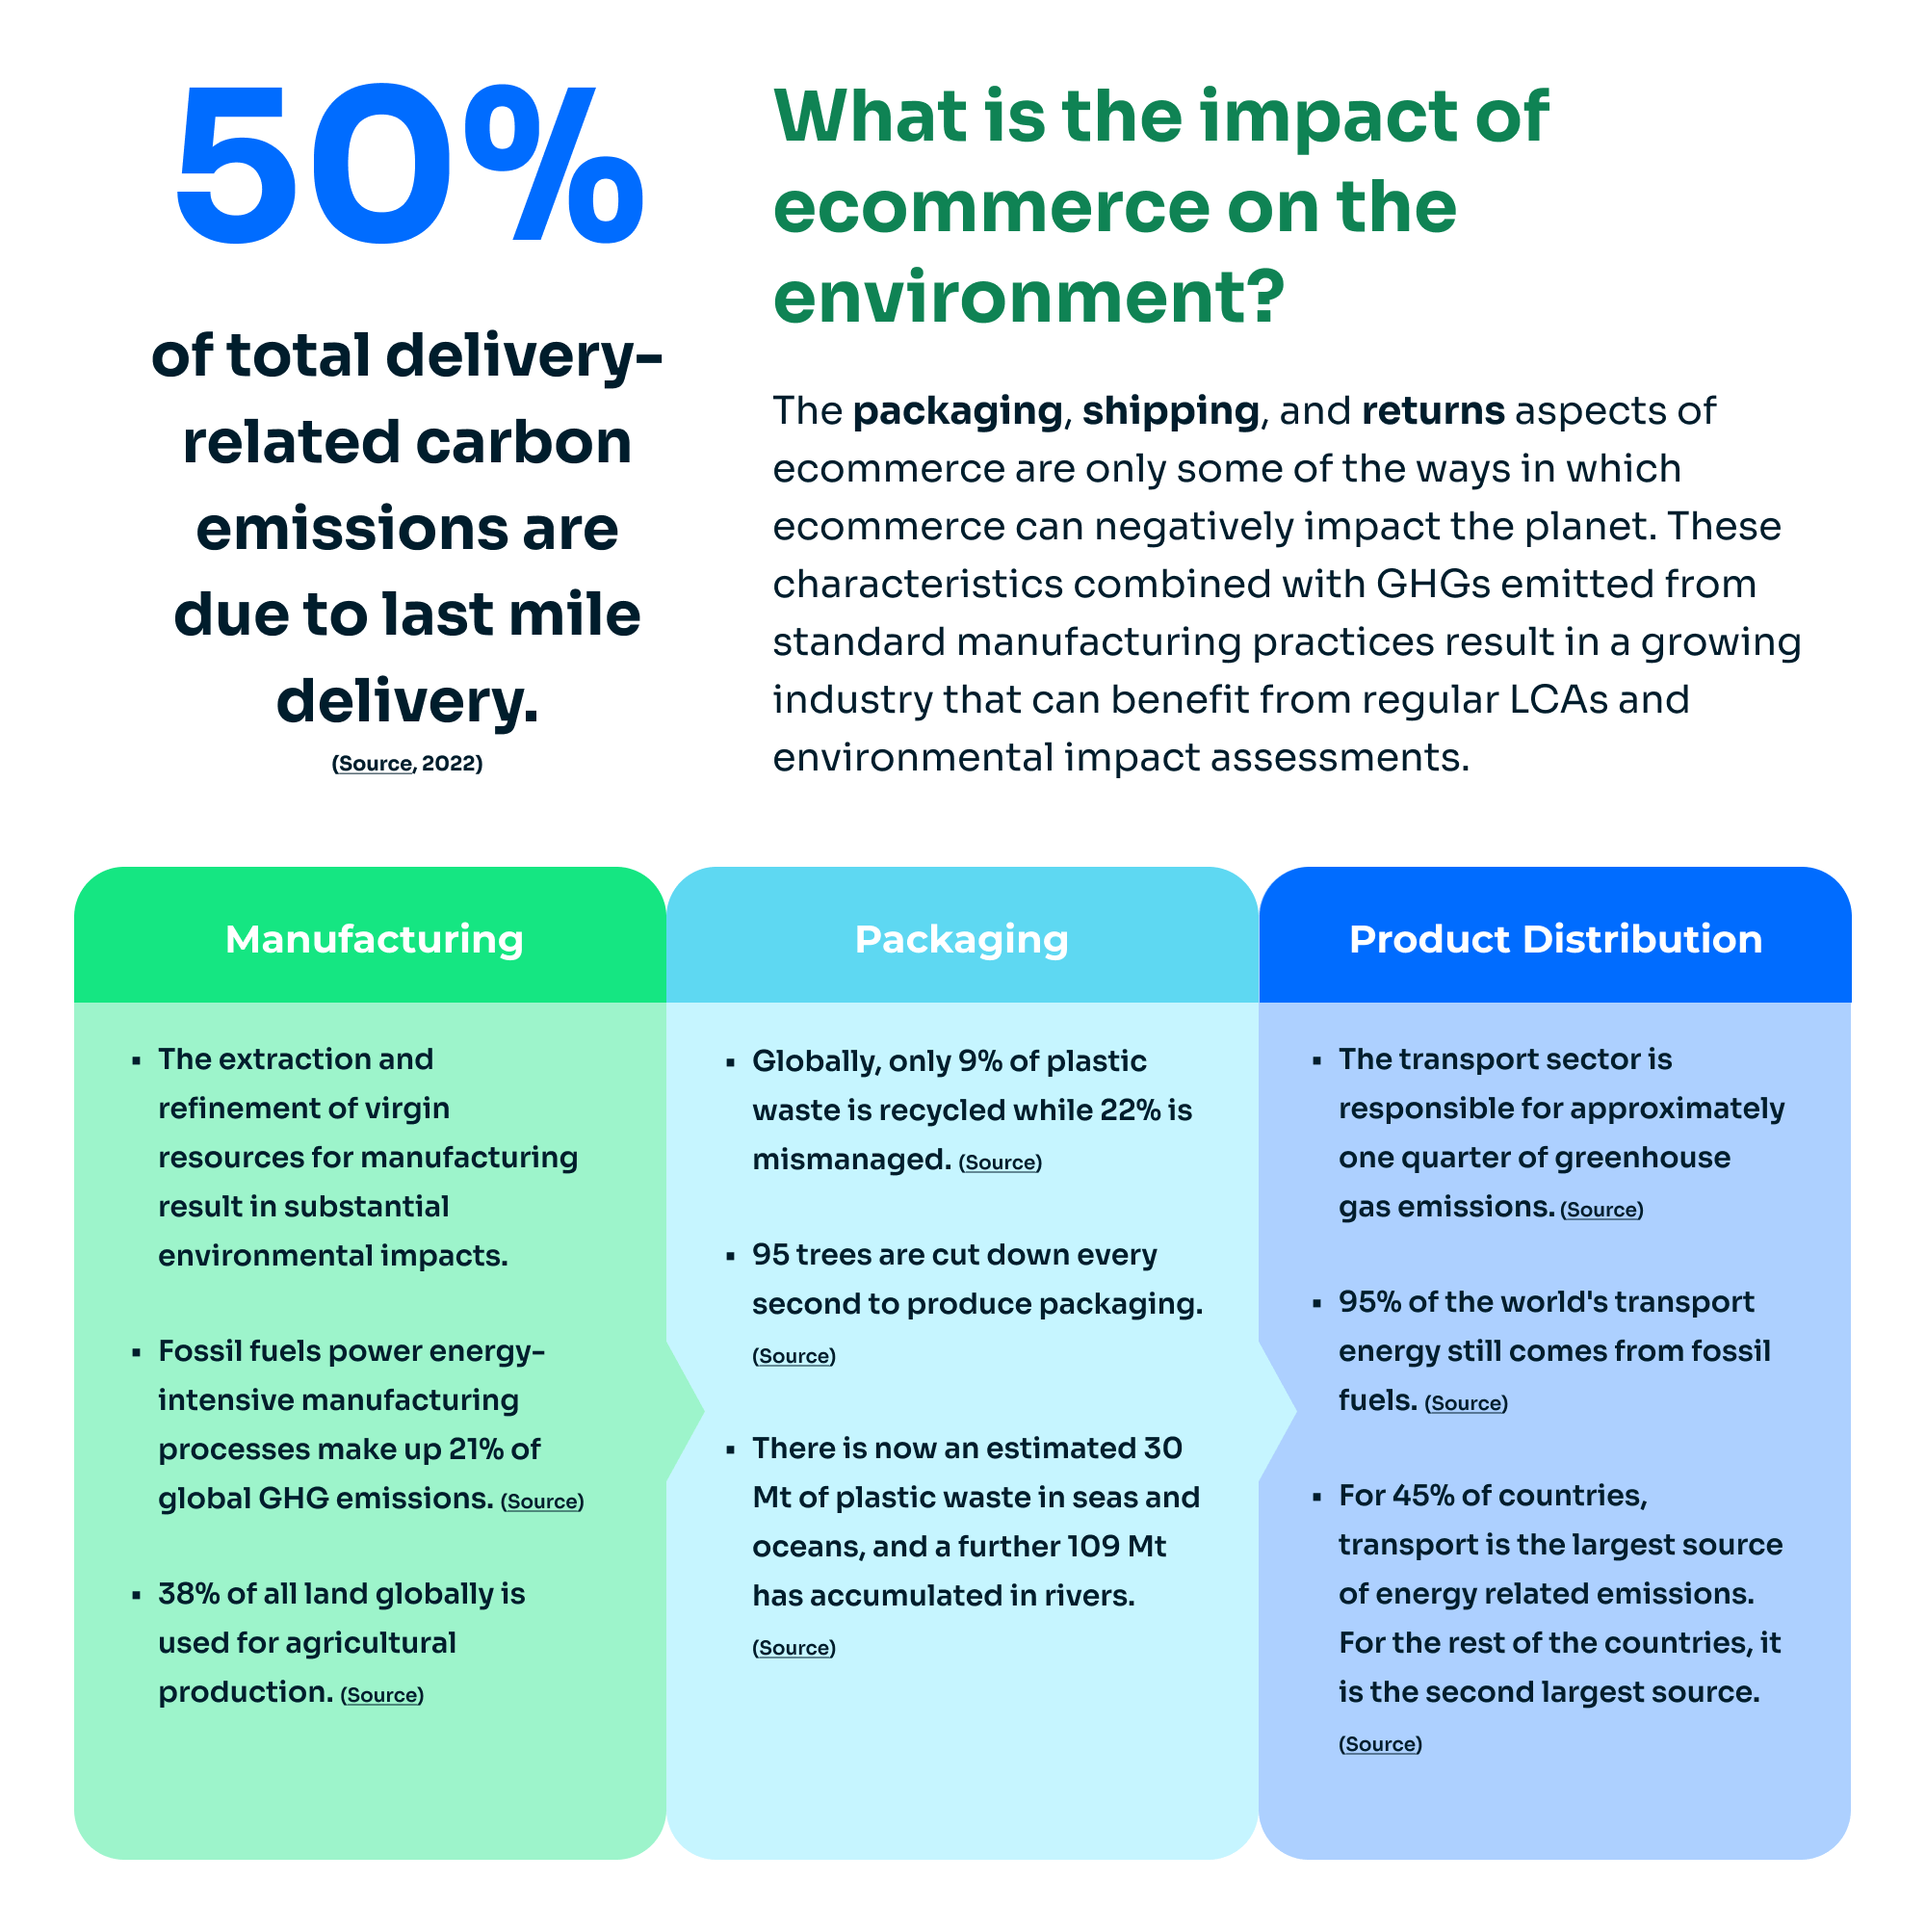 impact of ecommerce on the environment